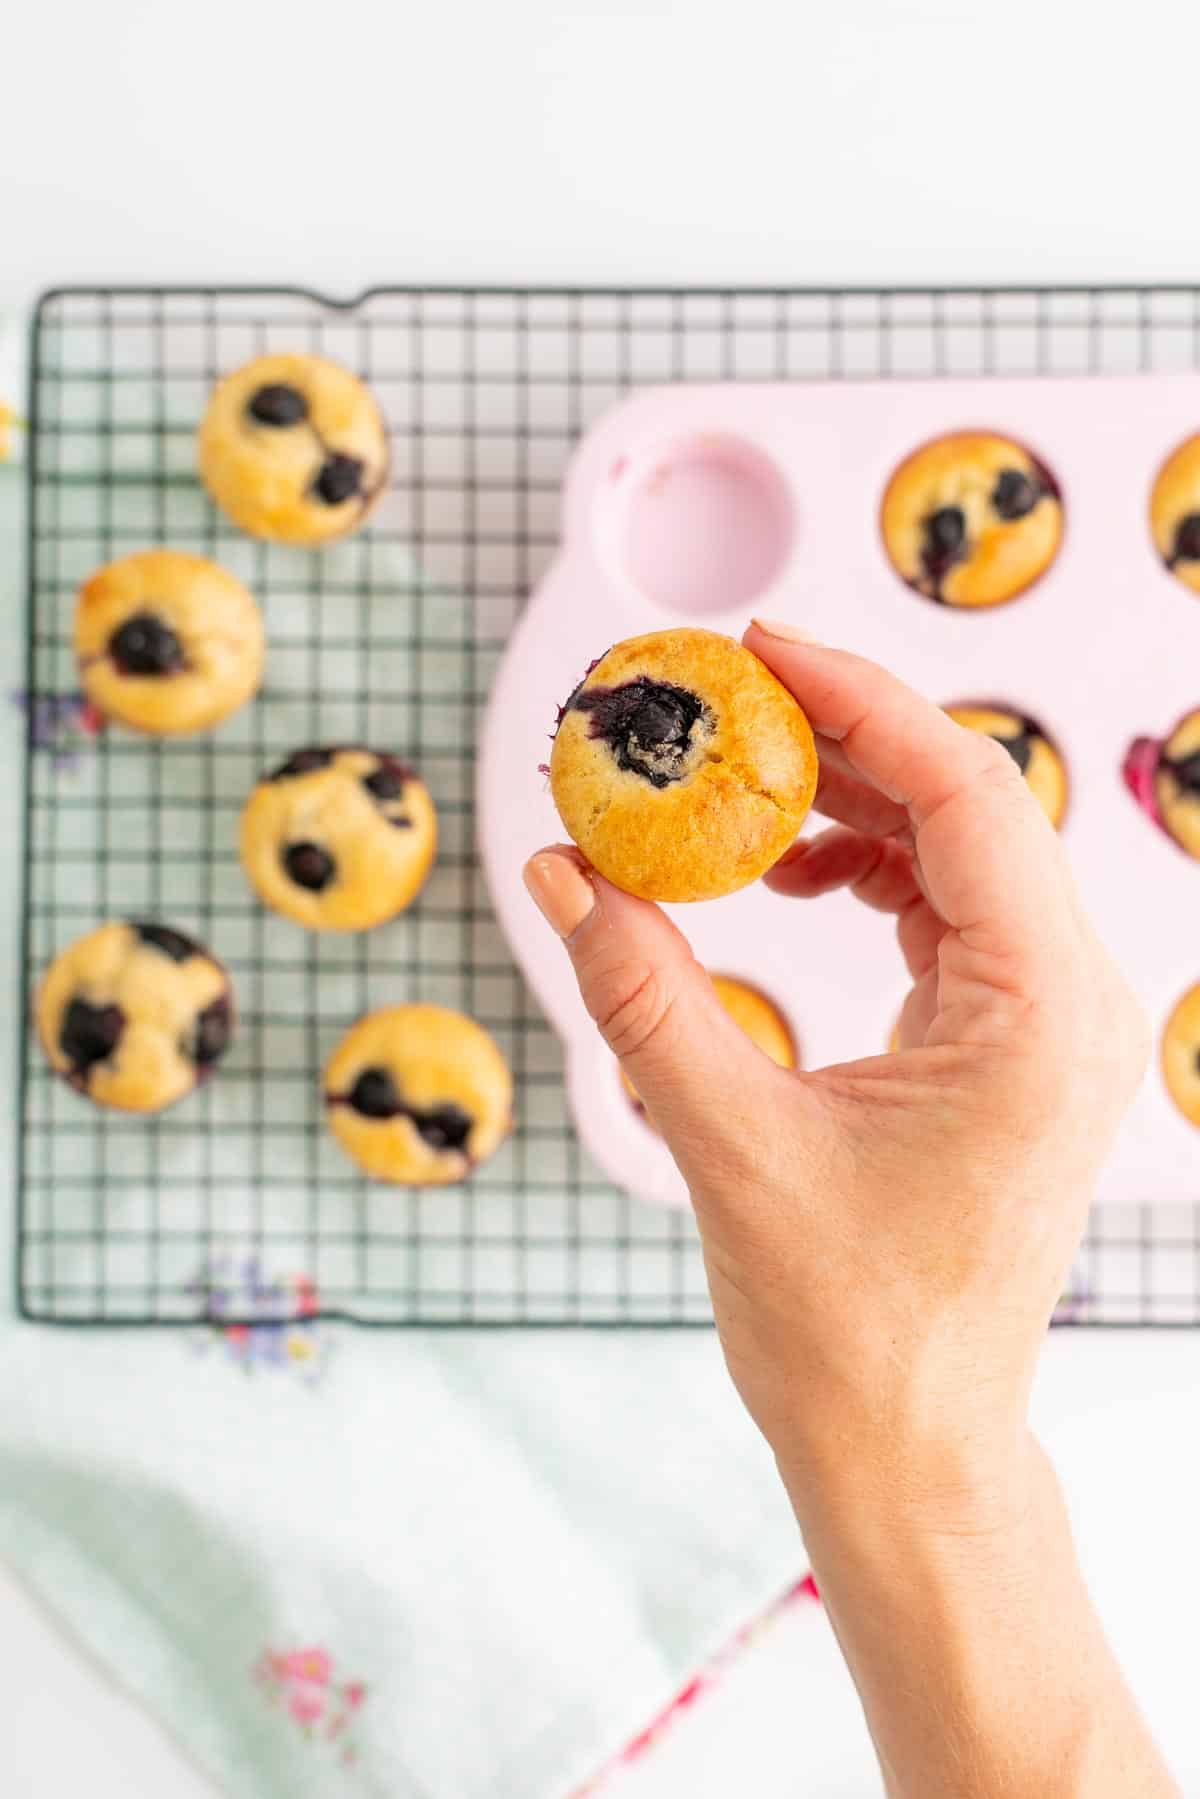 A mini muffin topped with a blueberry being held above a tray of cooked muffins.